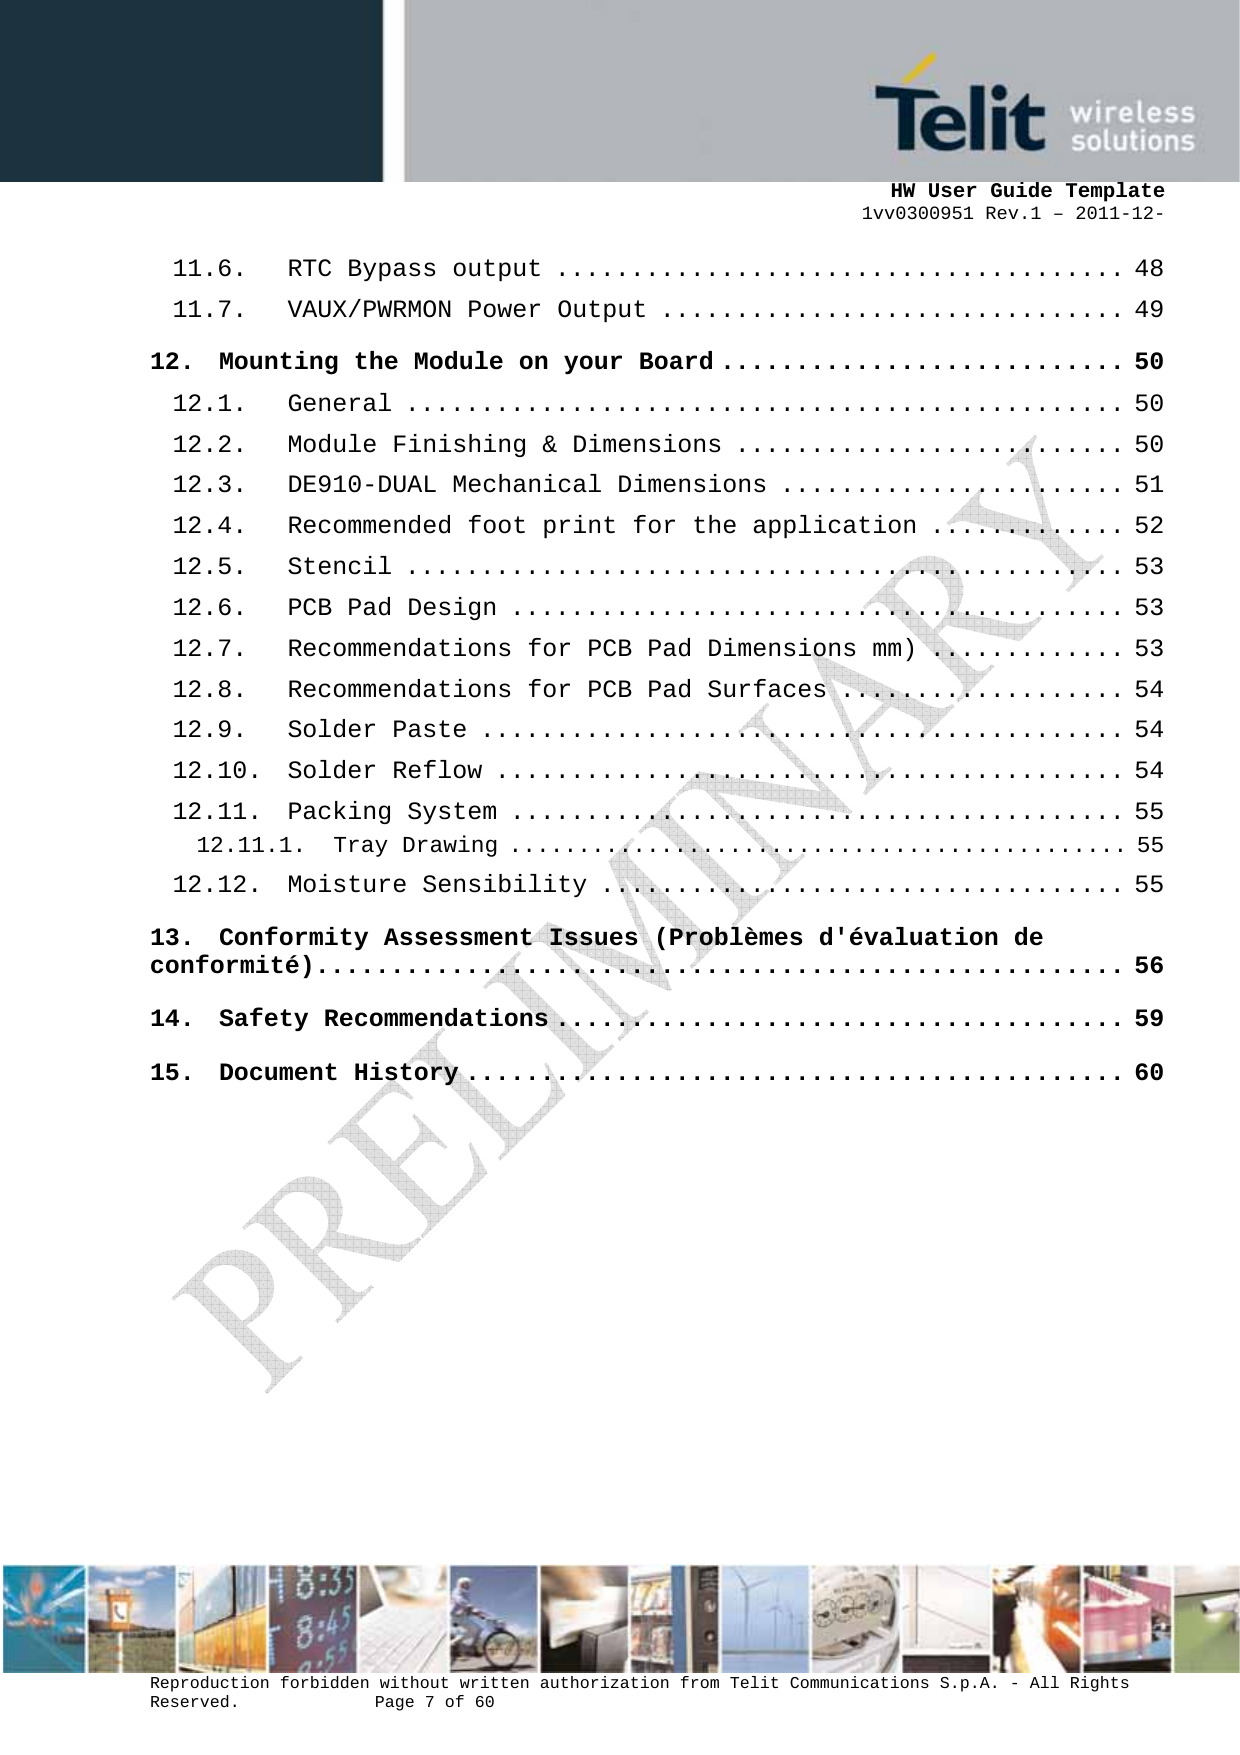      HW User Guide Template 1vv0300951 Rev.1 – 2011-12-  Reproduction forbidden without written authorization from Telit Communications S.p.A. - All Rights Reserved.    Page 7 of 60                                                     11.6. RTC Bypass output ...................................... 48 11.7. VAUX/PWRMON Power Output ............................... 49 12. Mounting the Module on your Board ........................... 50 12.1. General ................................................ 50 12.2. Module Finishing &amp; Dimensions .......................... 50 12.3. DE910-DUAL Mechanical Dimensions ....................... 51 12.4. Recommended foot print for the application ............. 52 12.5. Stencil ................................................ 53 12.6. PCB Pad Design ......................................... 53 12.7. Recommendations for PCB Pad Dimensions mm) ............. 53 12.8. Recommendations for PCB Pad Surfaces ................... 54 12.9. Solder Paste ........................................... 54 12.10. Solder Reflow .......................................... 54 12.11. Packing System ......................................... 55 12.11.1. Tray Drawing ............................................. 55 12.12. Moisture Sensibility ................................... 55 13. Conformity Assessment Issues (Problèmes d&apos;évaluation de conformité)...................................................... 56 14. Safety Recommendations ...................................... 59 15. Document History ............................................ 60 